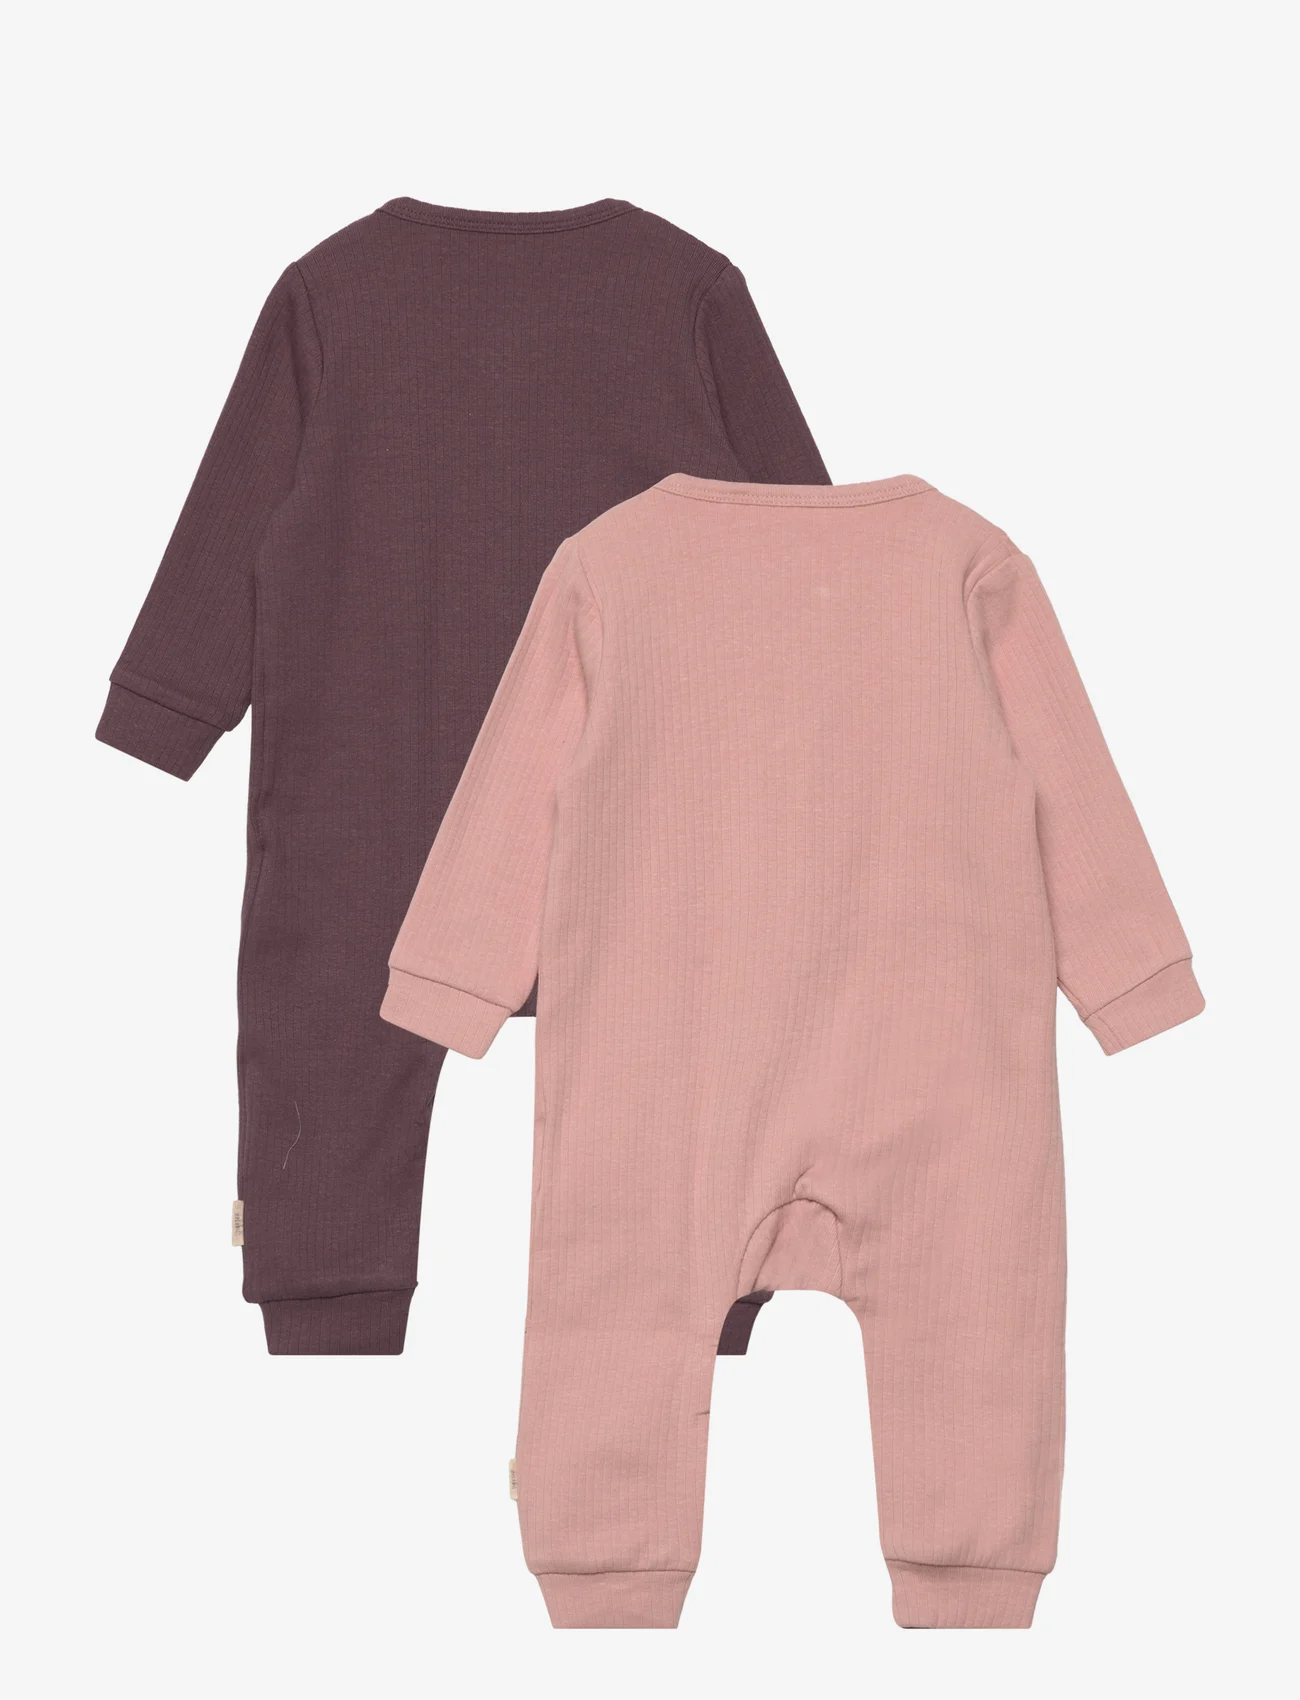 Minymo - Jumpsuit LS (2-pack) - long-sleeved - misty rose - 1